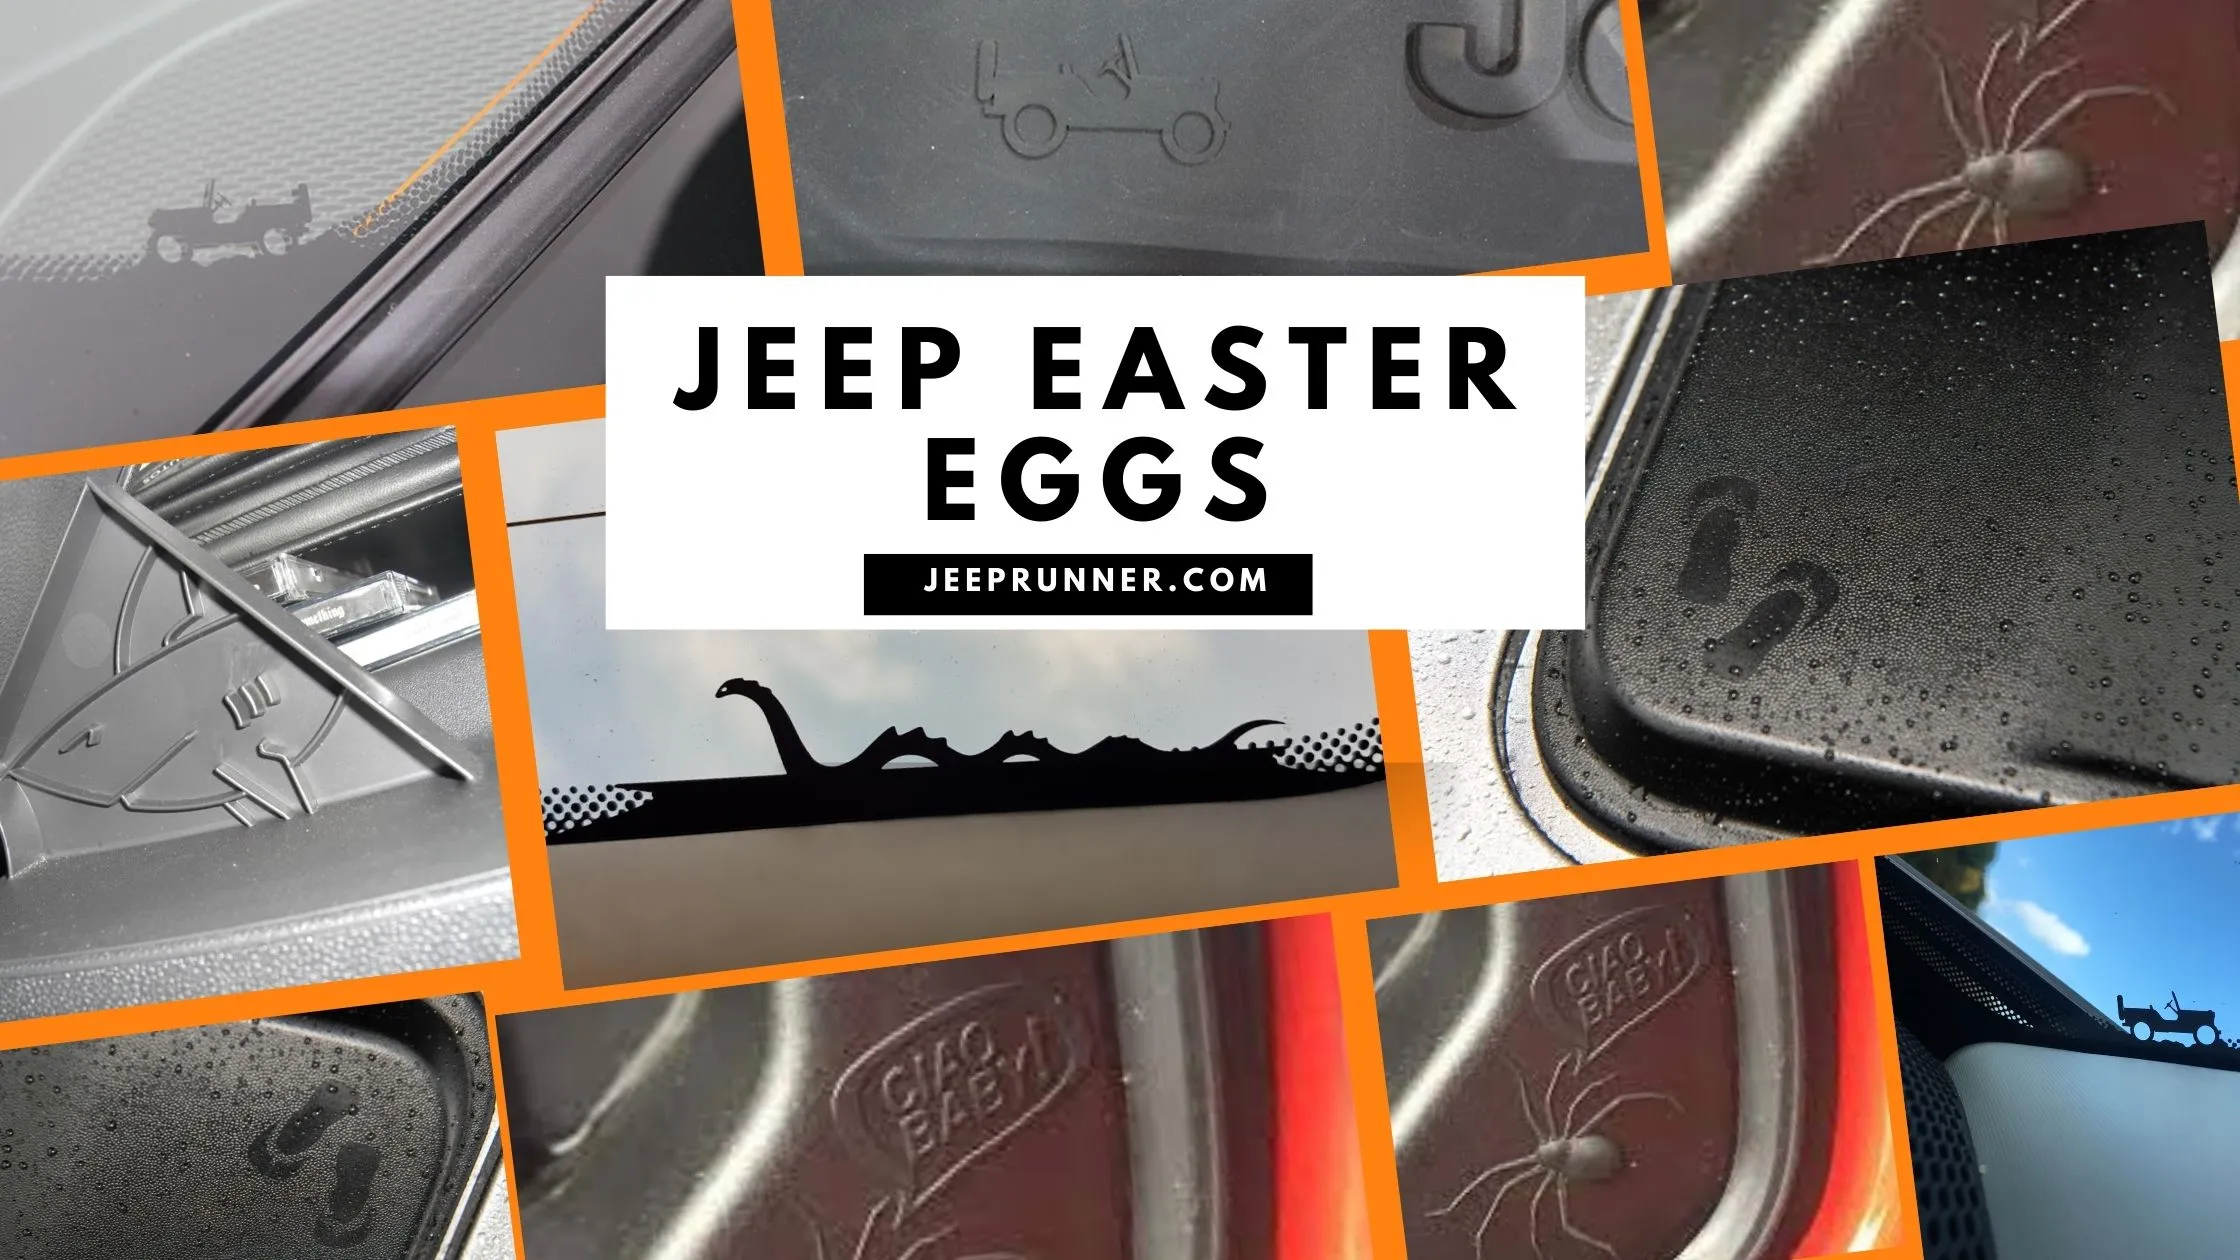 Jeep Easter Eggs